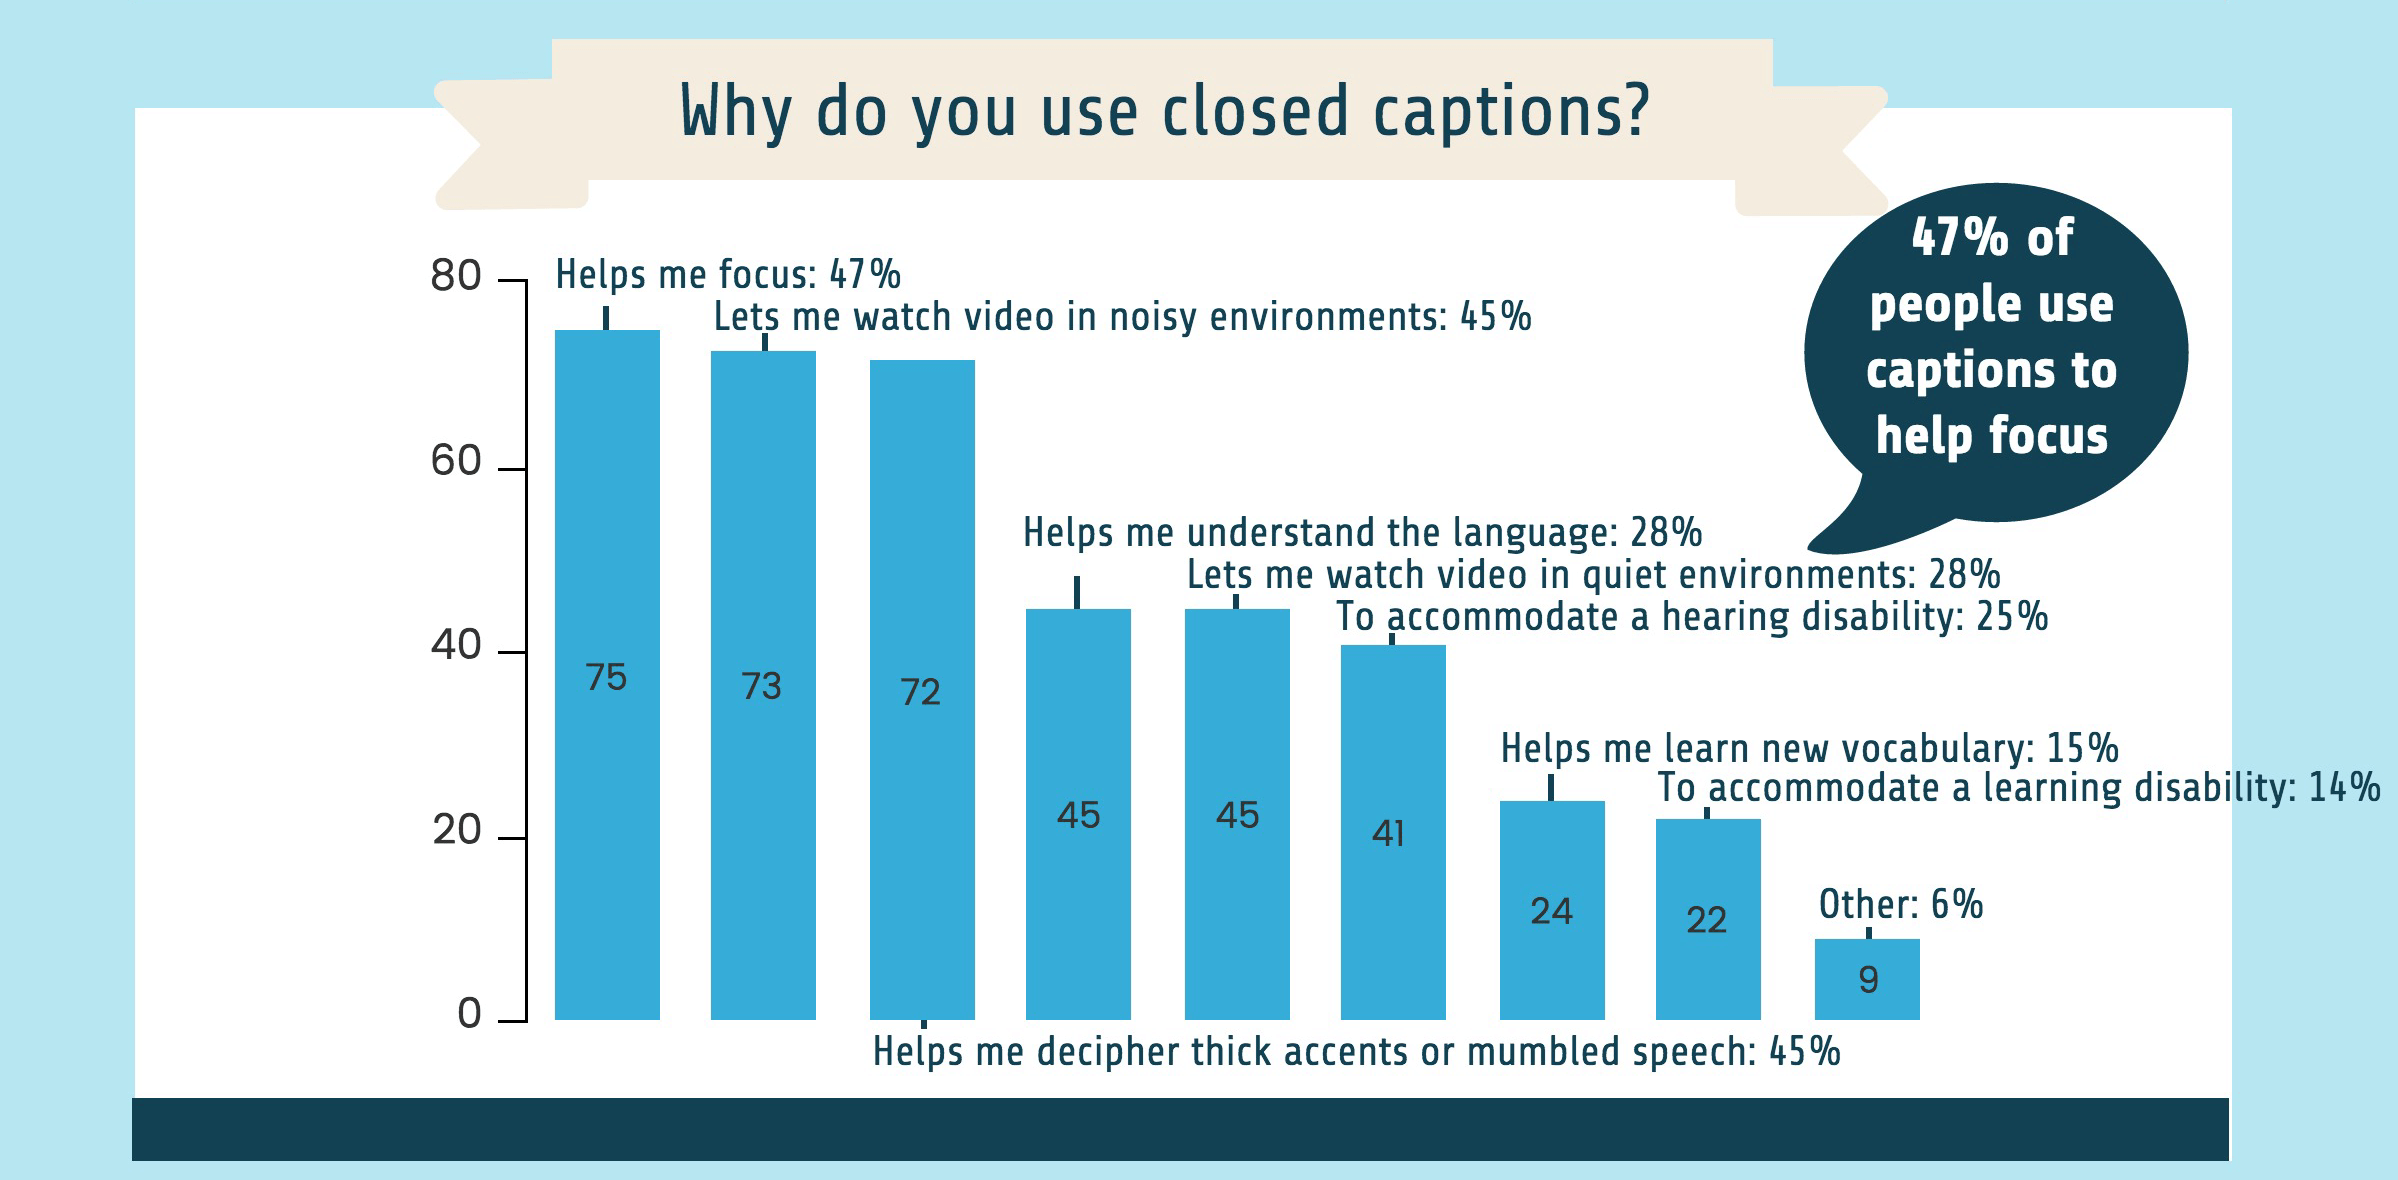 Only 25% of people who use closed captions use them to accommodate a hearing disability. Why do you use closed captions? Helps me focus: 47%, lets me watch video in noisy environments: 45%, helps me decipher thick accents or mumbled speech: 45%, helps me understand the language: 28%, Lets me watch video in quiet environments: 28%, Helps me learn new vocabulary: 15%, To accommodate a learning disability: 14%, Other: 6%.